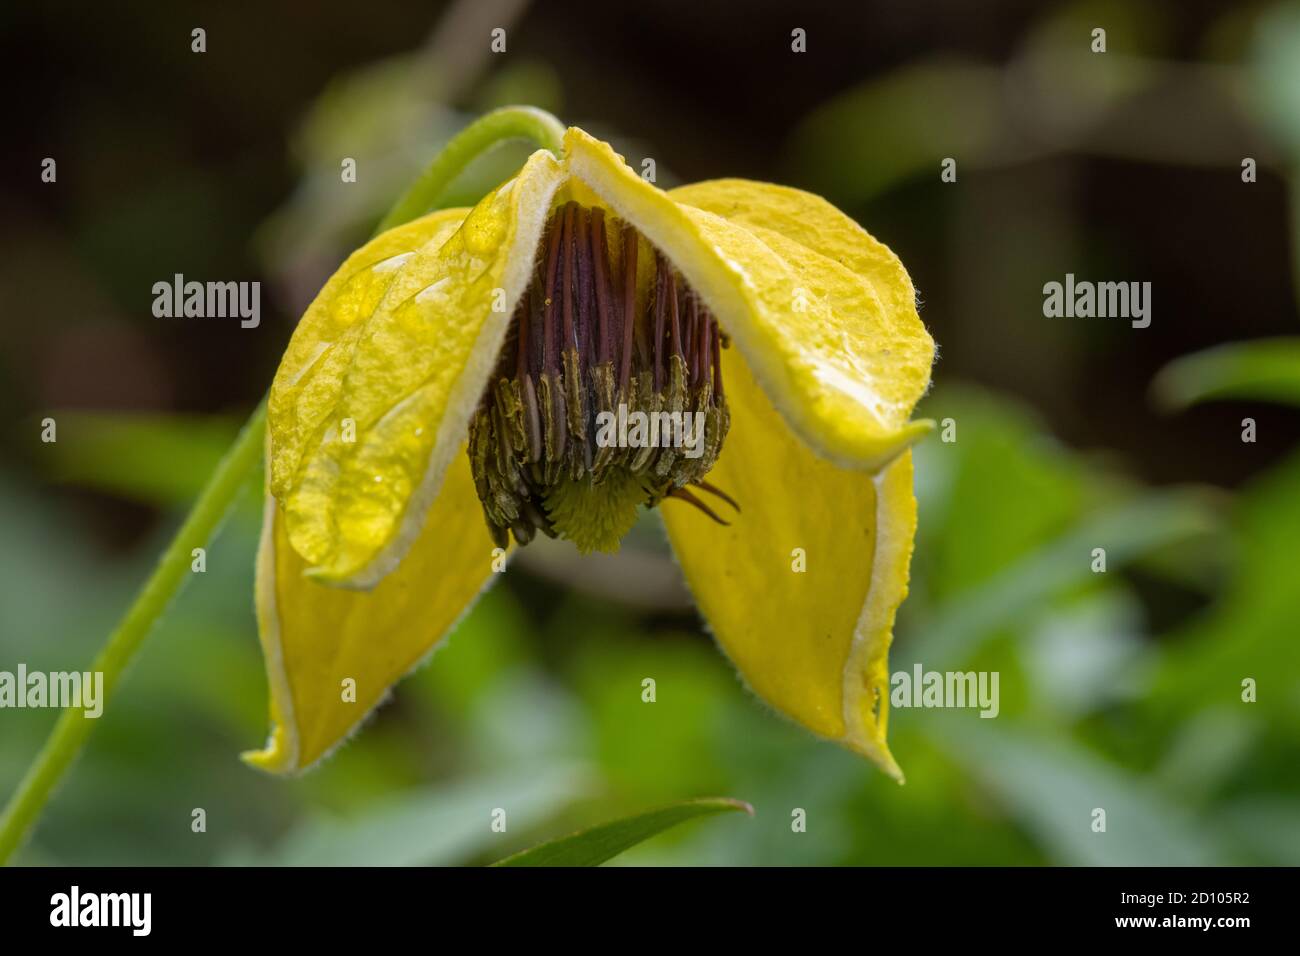 Close up of a yellow downy clematis (clematis macropetala) flower in bloom Stock Photo